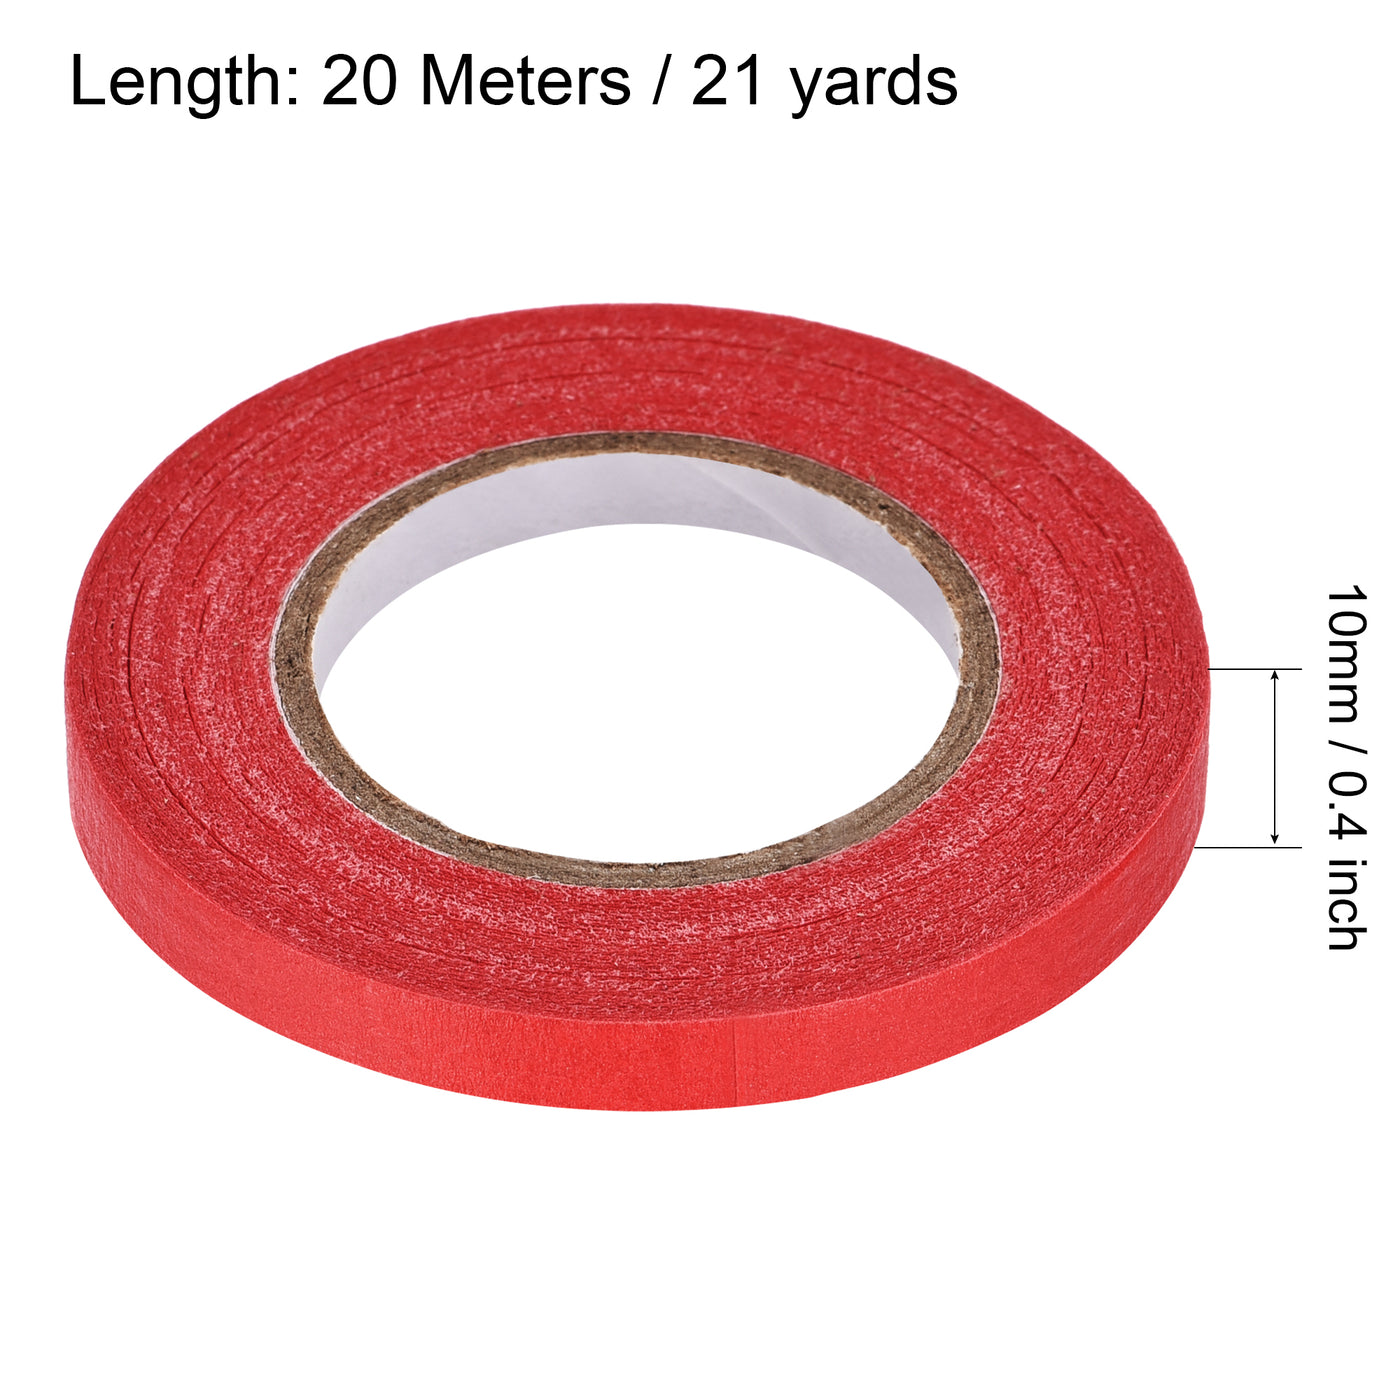 uxcell Uxcell 3Pcs 10mm 0.4 inch Wide 20m 21 Yards Masking Tape Painters Tape Rolls Red